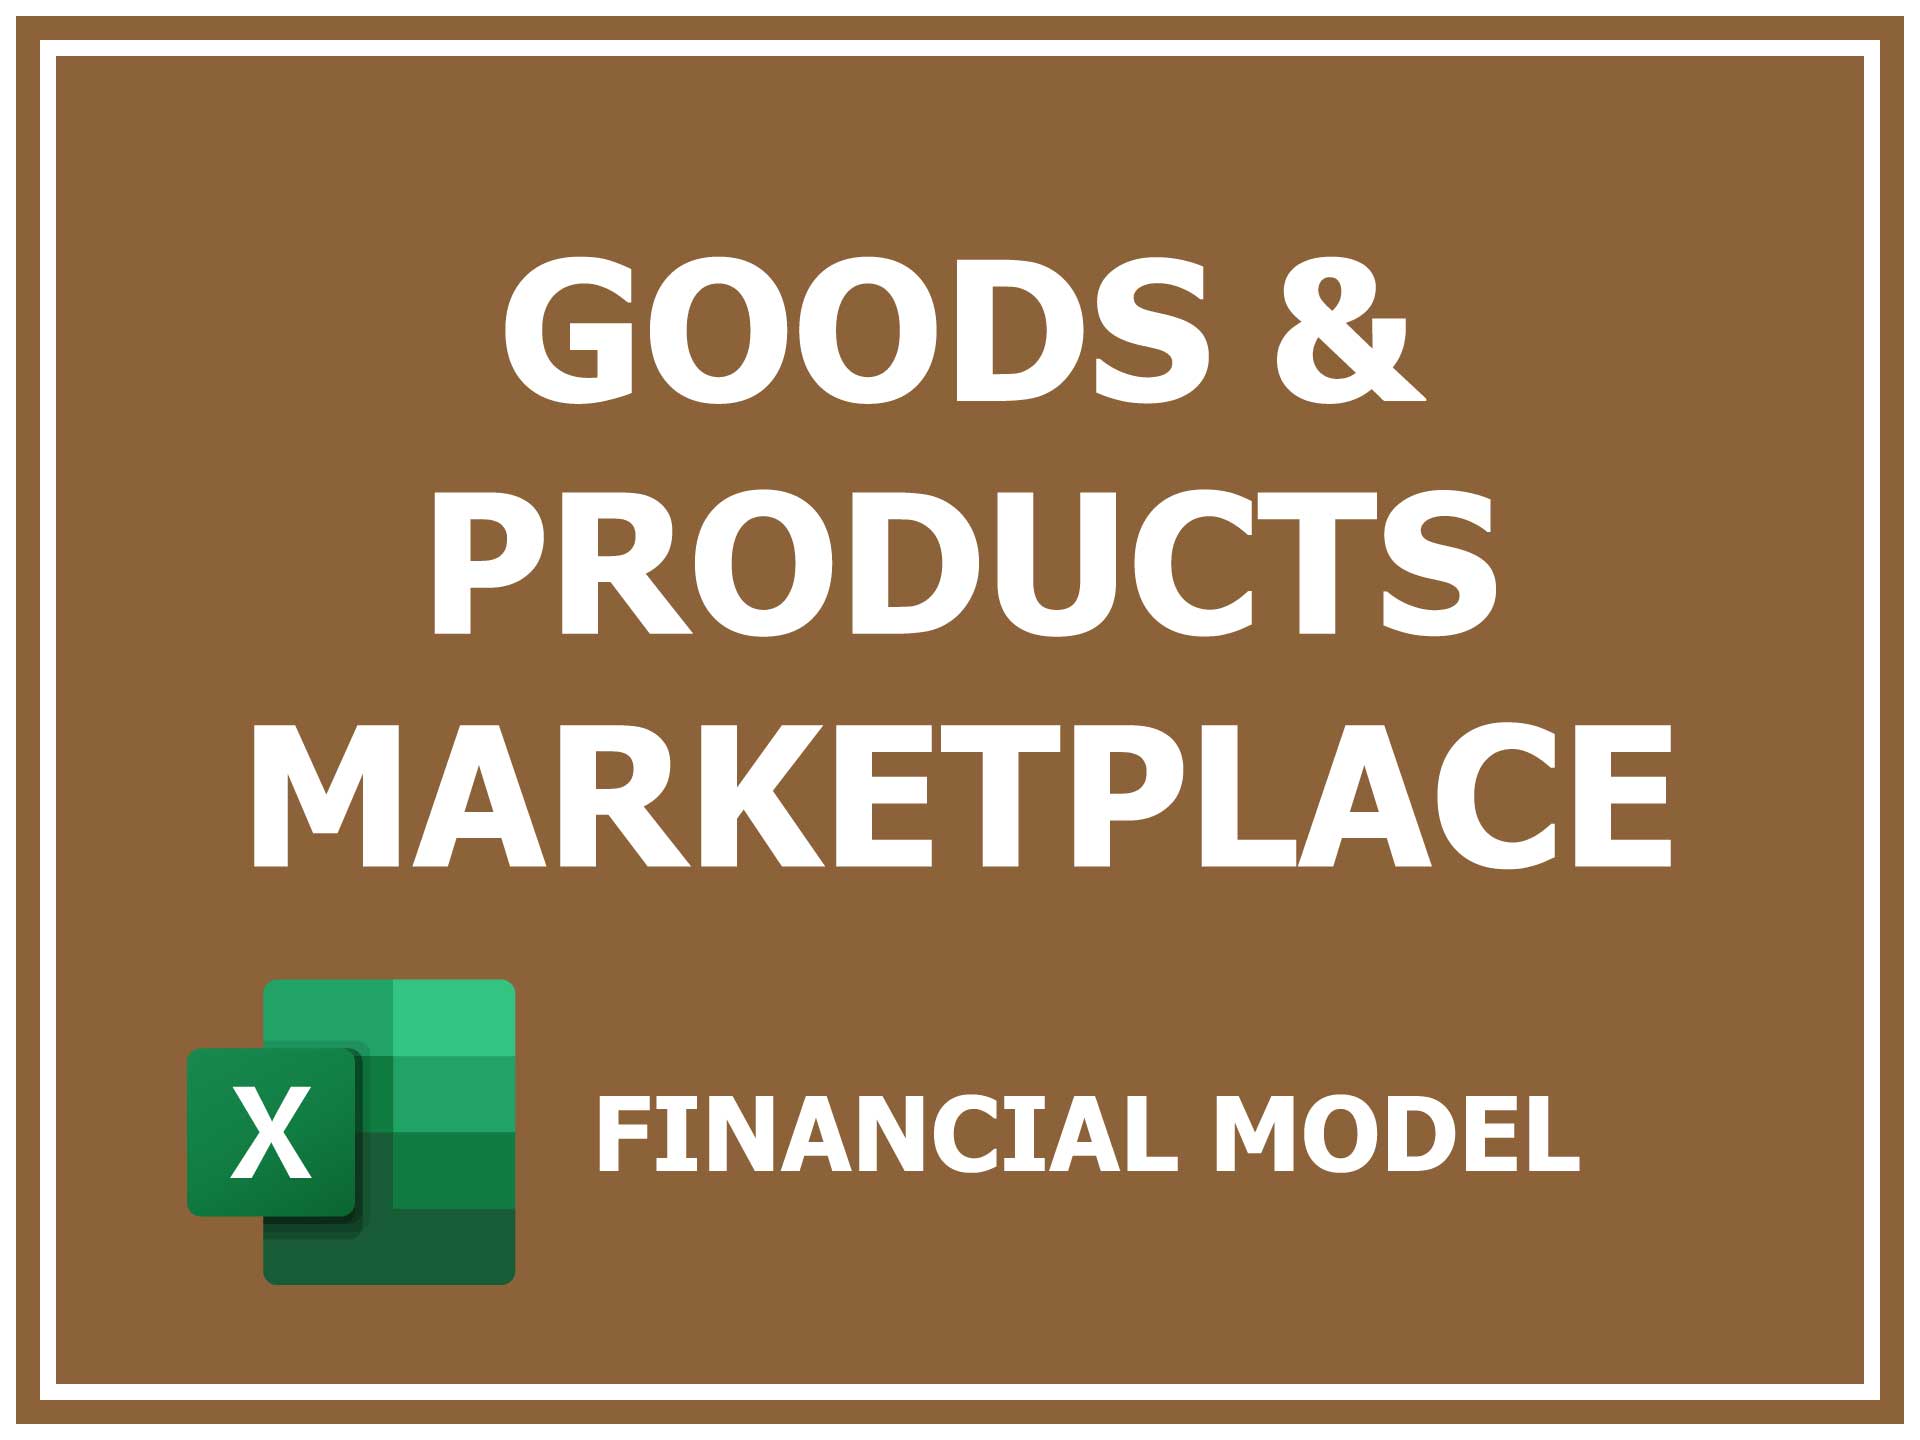 Goods & Products Marketplace